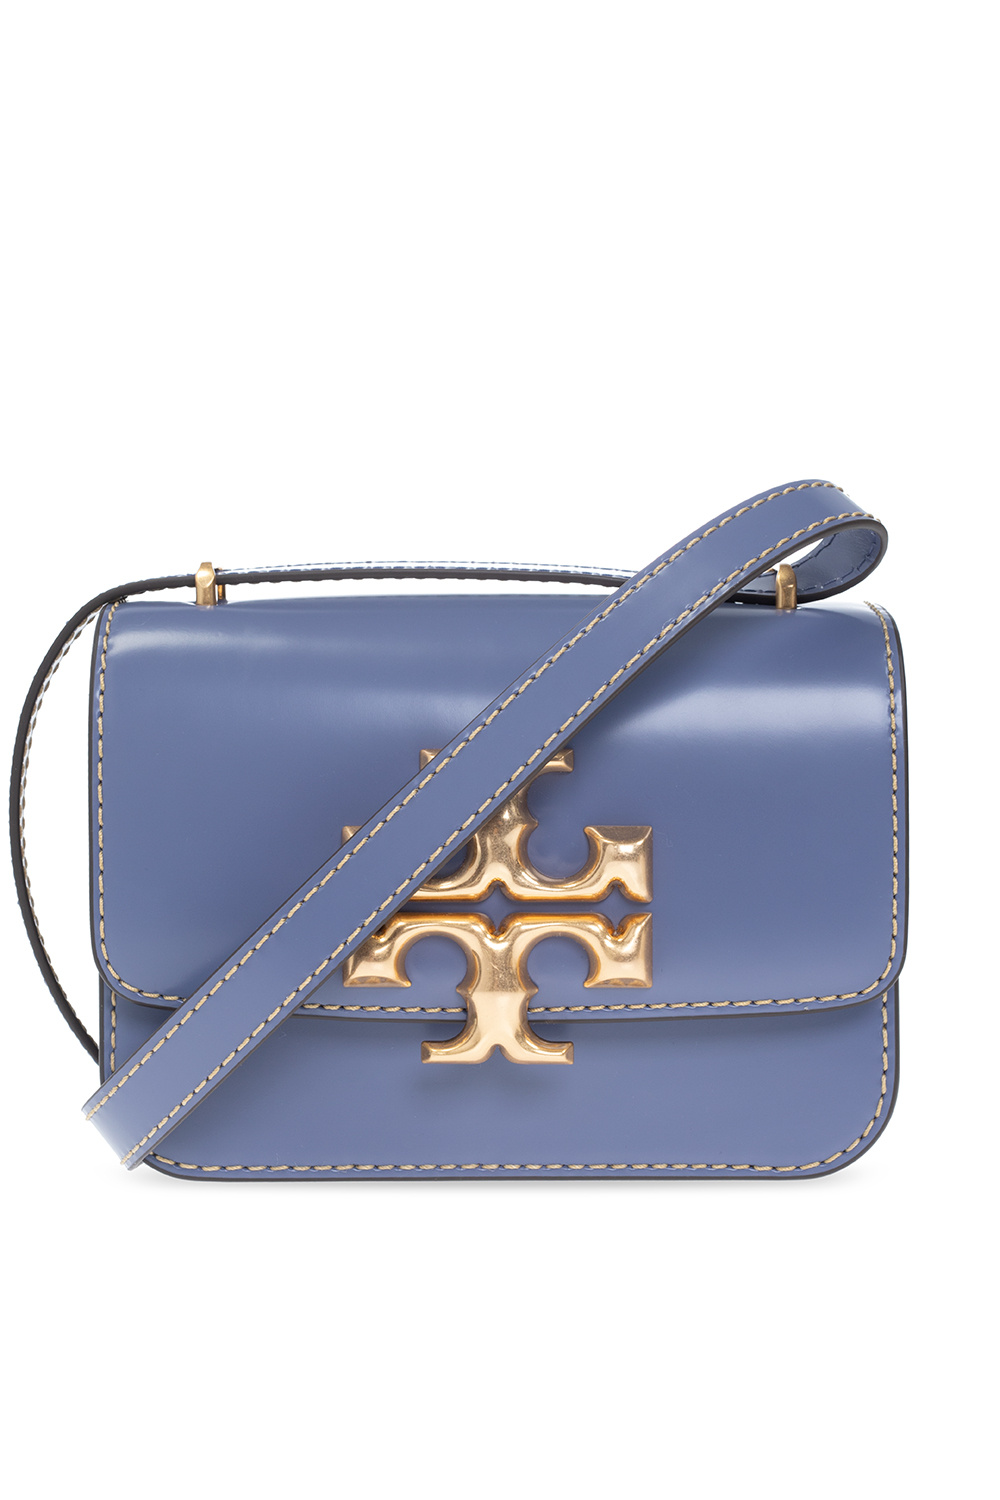 Tory Burch Eleanor Small Leather Shoulder Bag in Blue